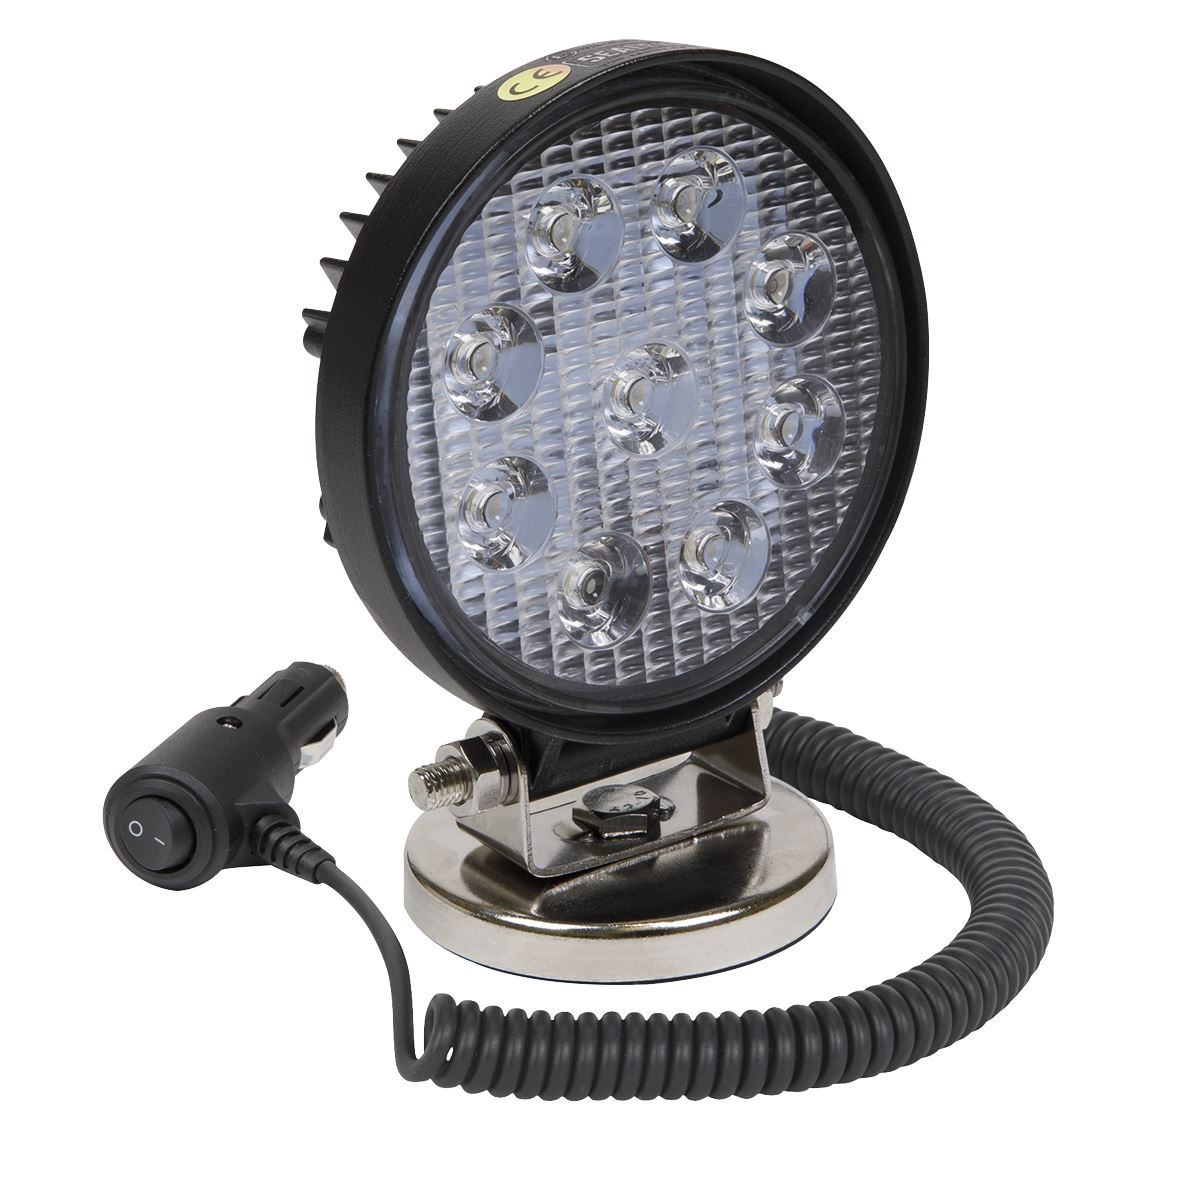 Sealey Round Worklight with Magnetic Base 27W SMD LED